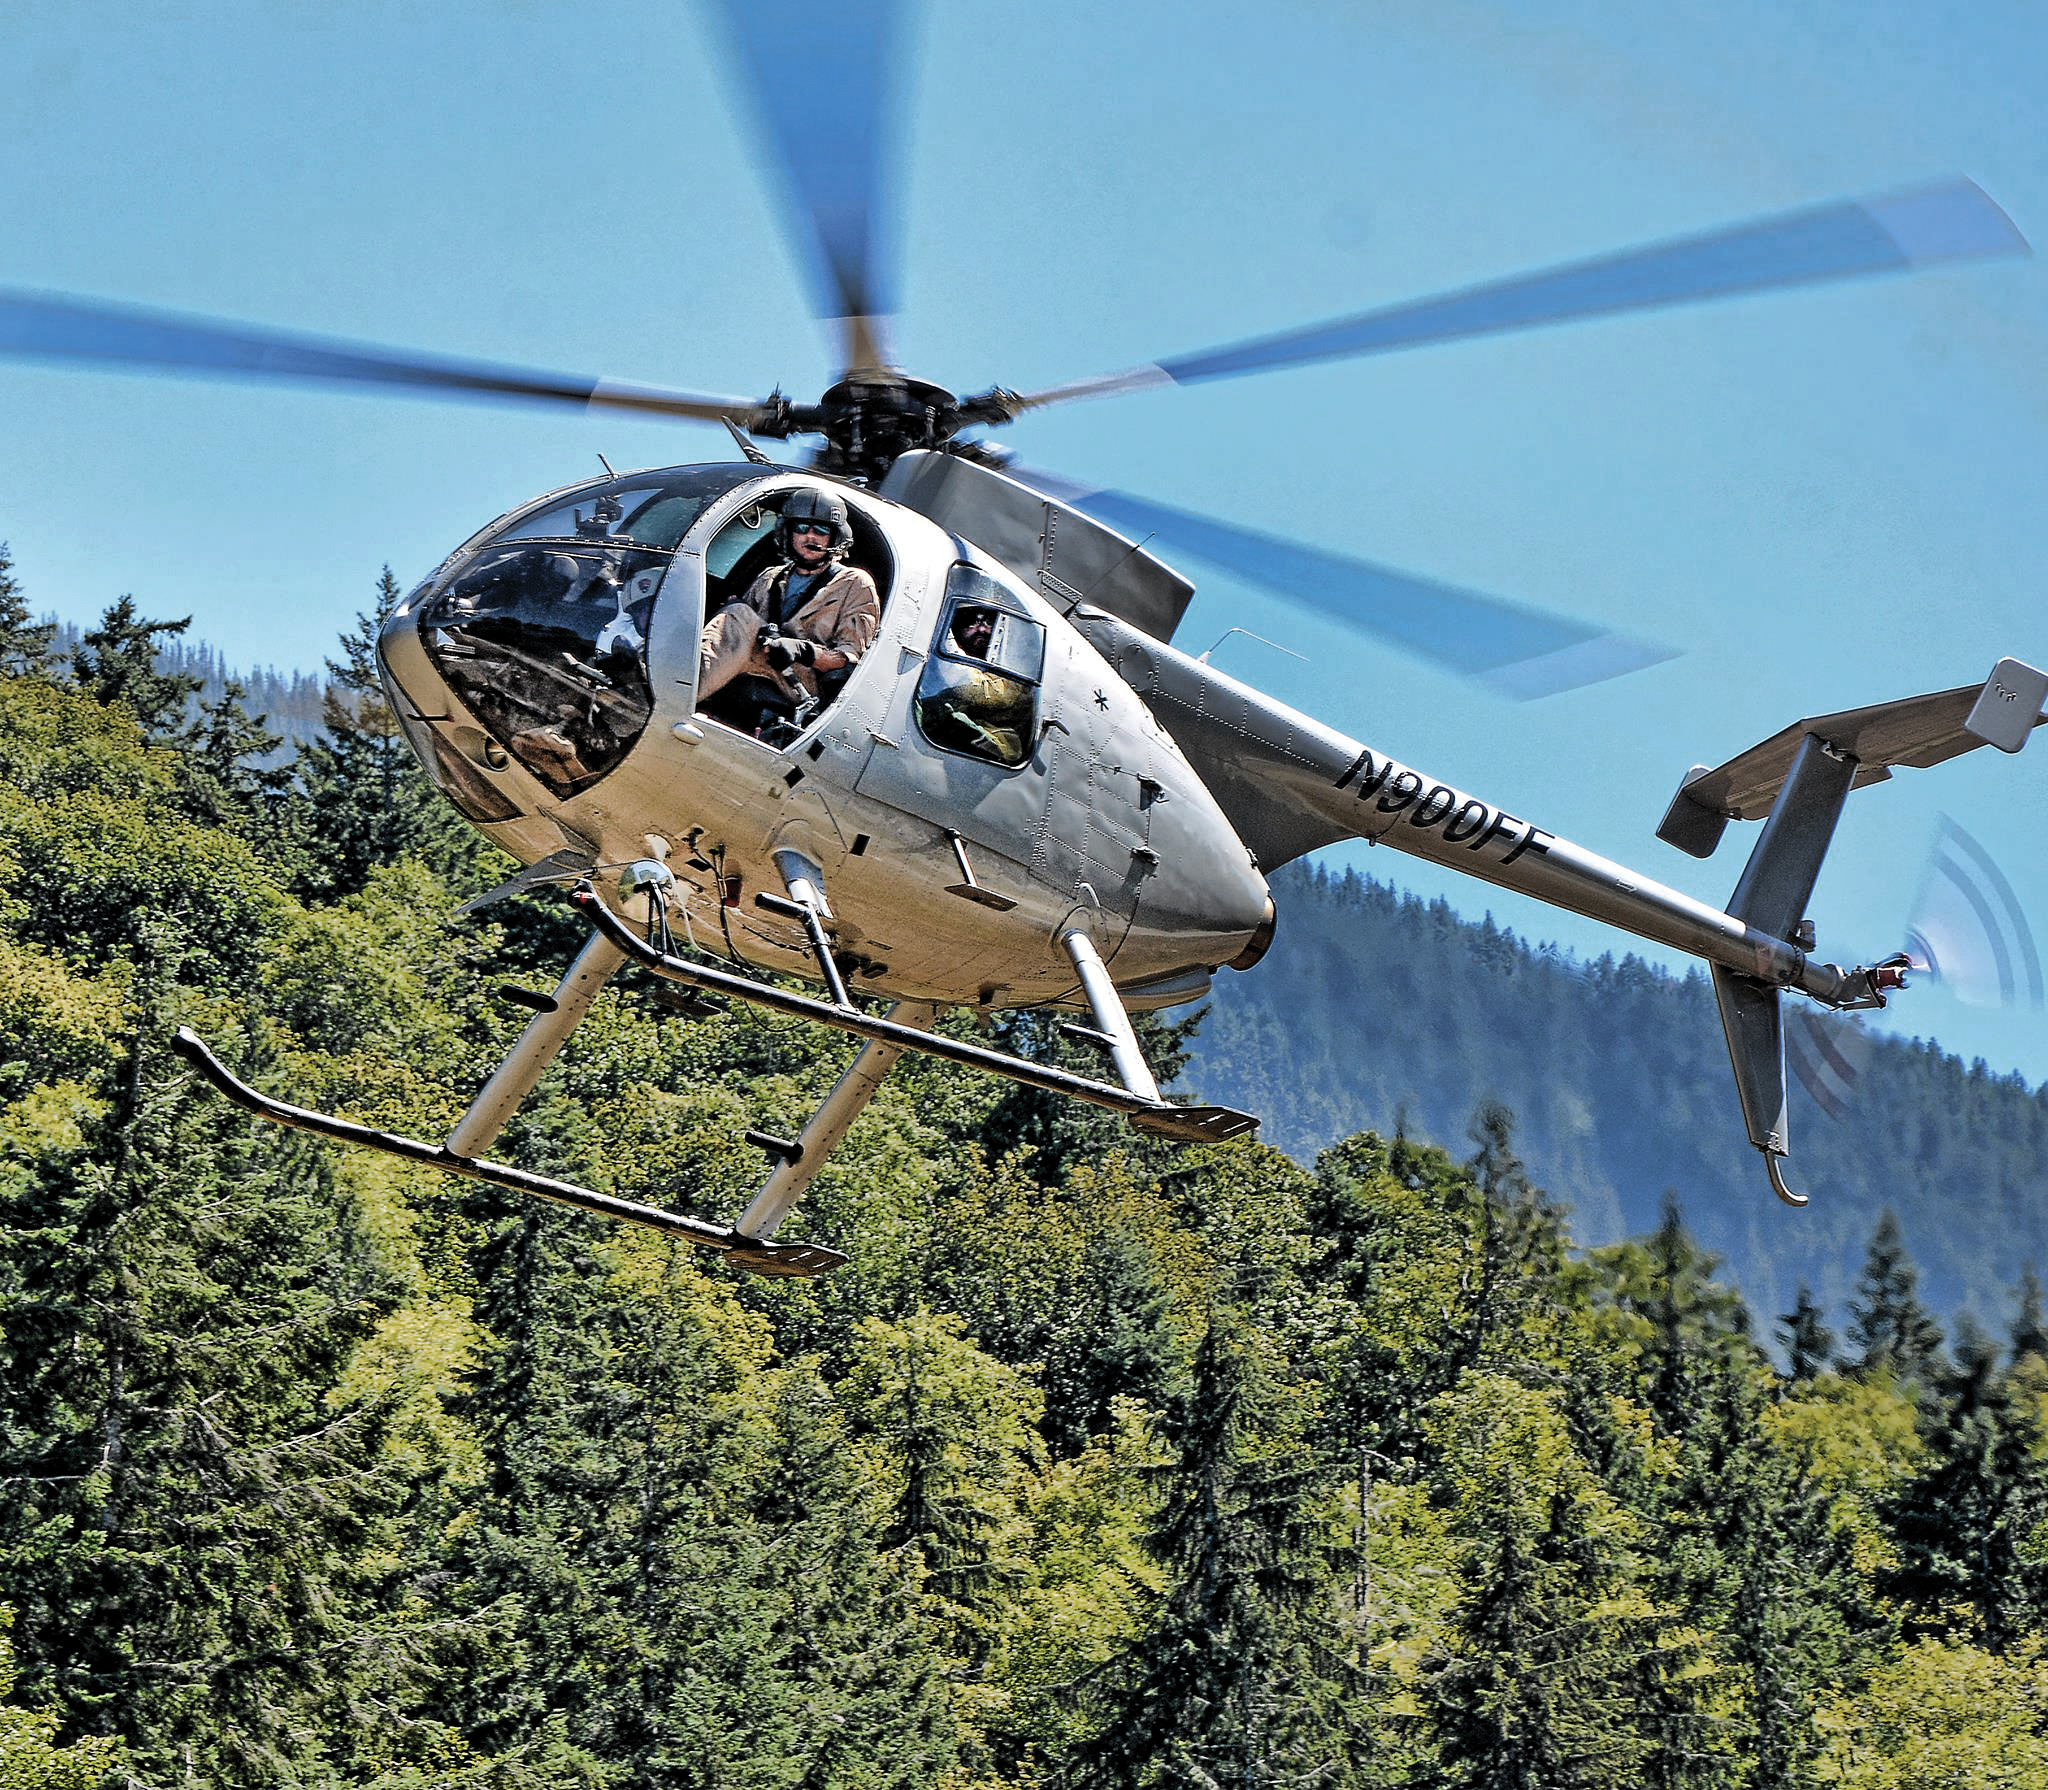 Clallam Fire District No. 2 personnel met up with this helicopter to transport two people from Olympic National Park  to a hospital. (Jay Cline/Clallam Fire District No. 2)